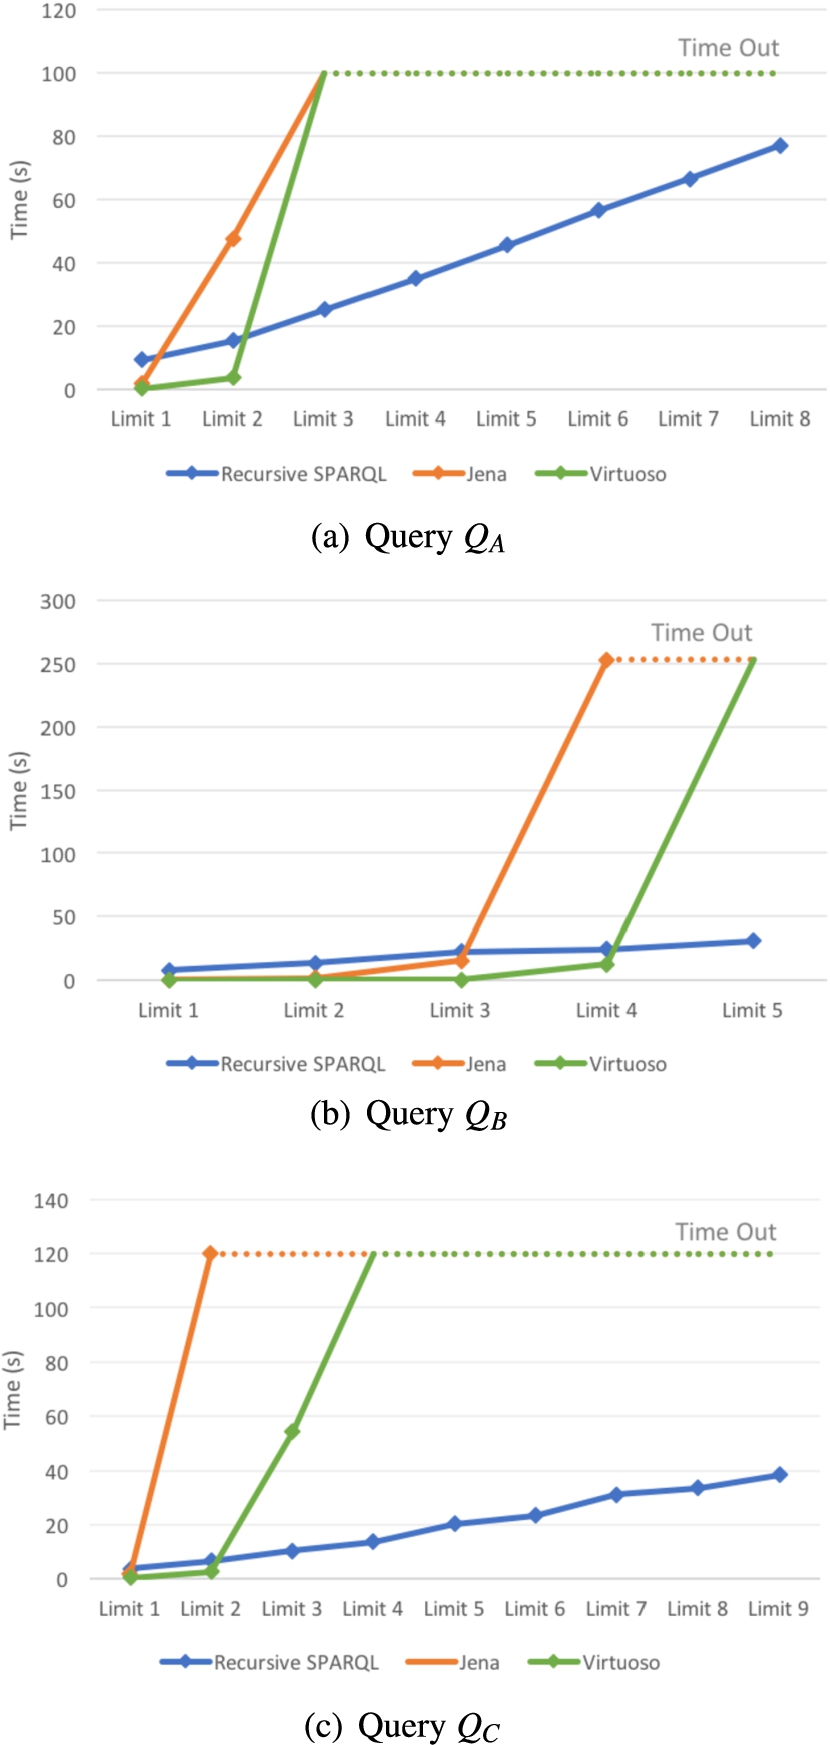 Limiting the number of iterations for the evaluation of QA, QB and QC over LMDB.